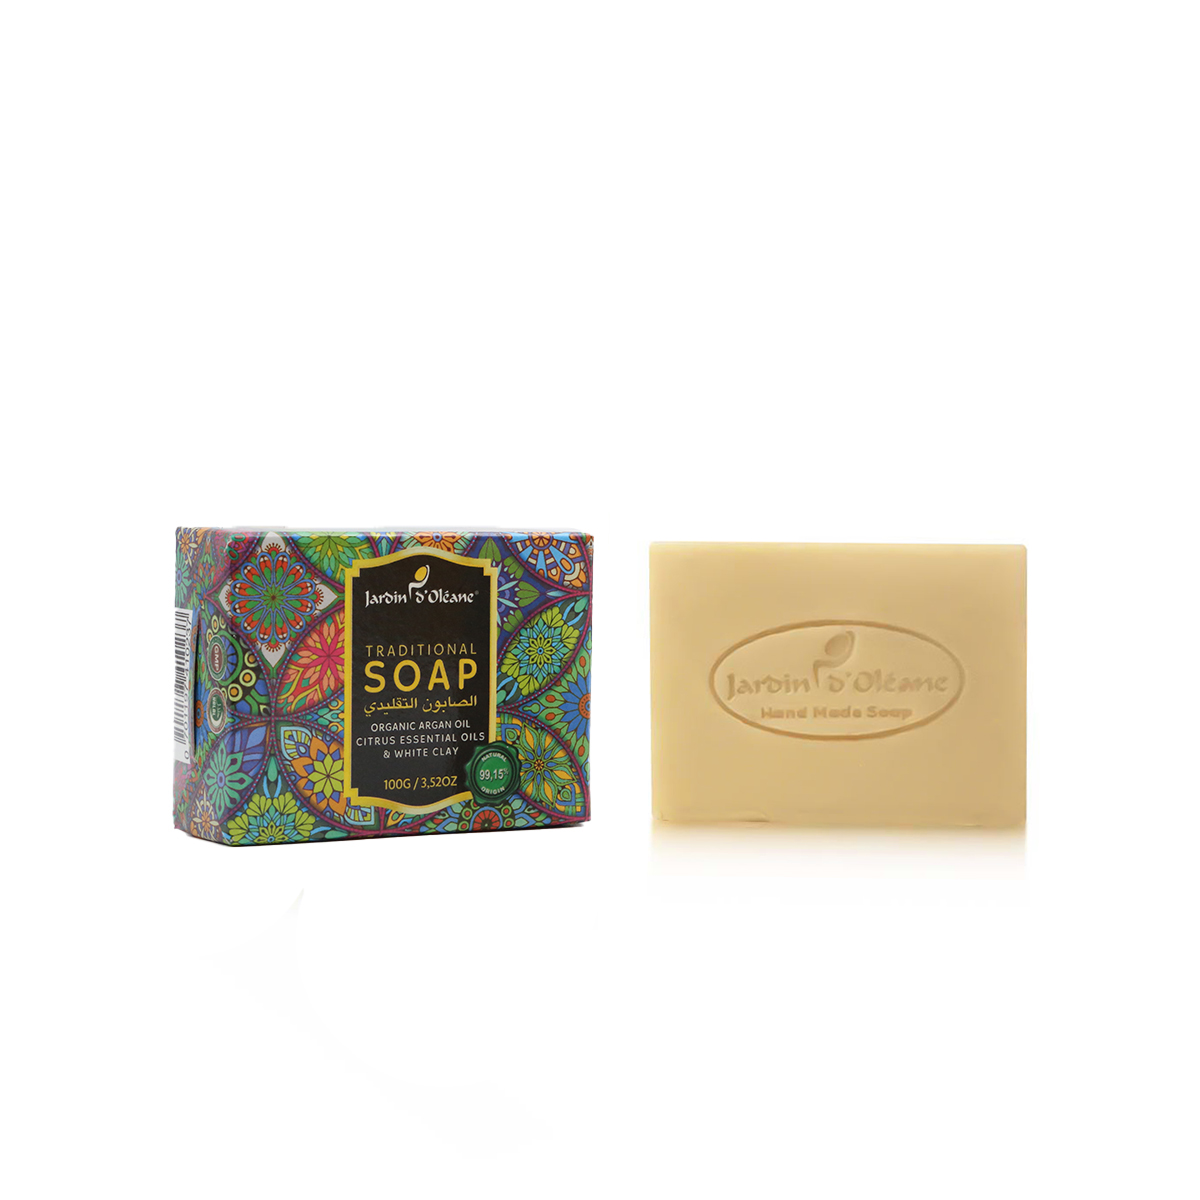 88-0745114420190410237-JARDIN TRADITIONAL SOAP -CITRUS ESSENTIAL OILS WHITE CLAY 100G